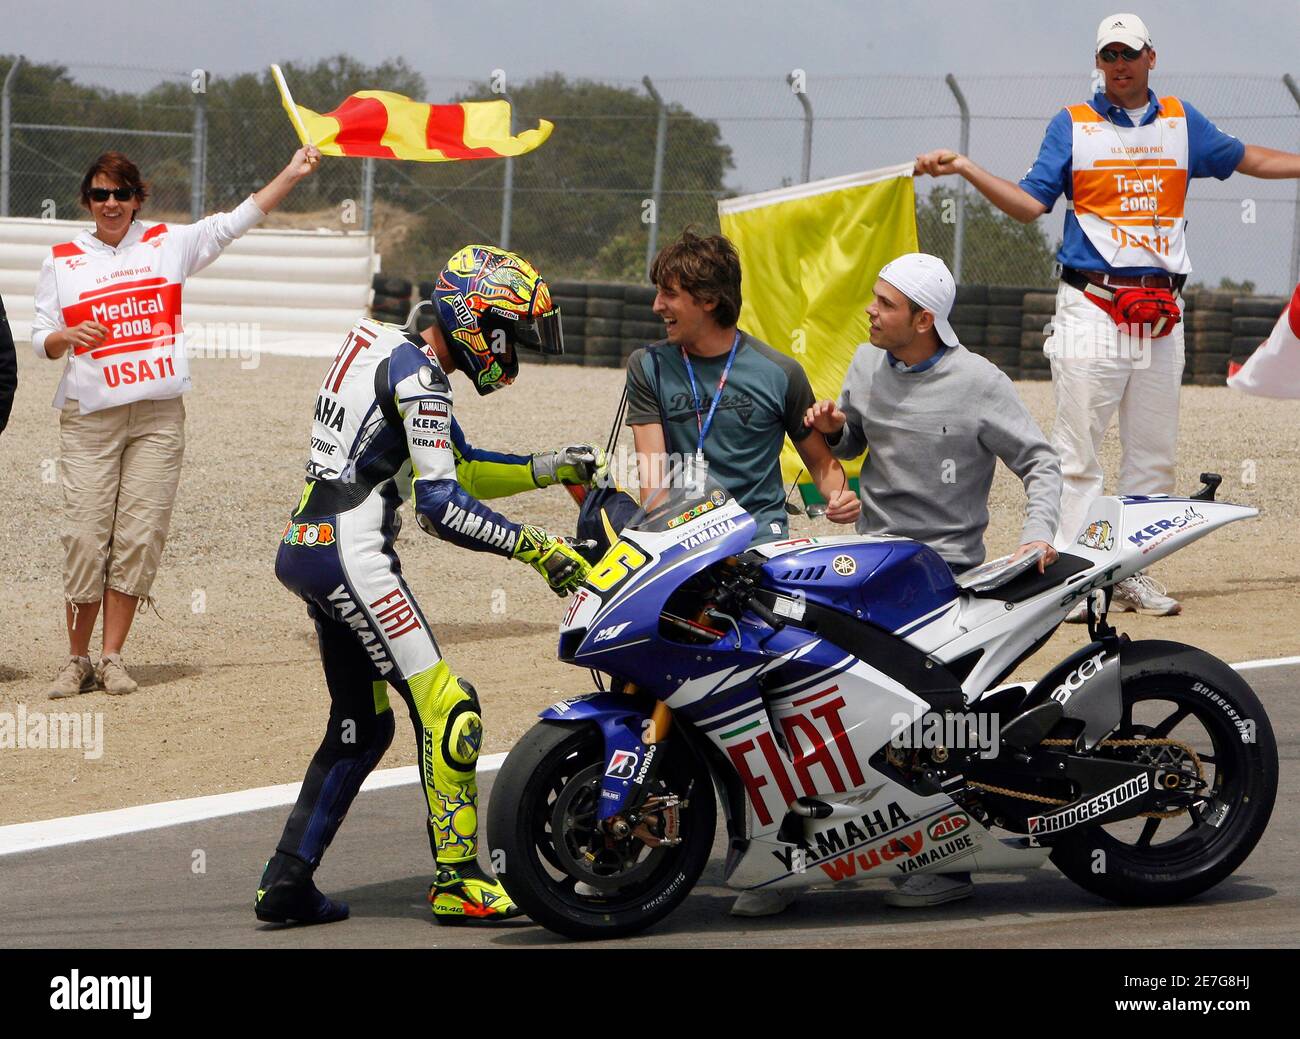 Yamaha MotoGP rider Valentino Rossi of Italy (2nd L) celebrates on the  track after winning the 2008 U.S. Grand Prix at Laguna Seca raceway near  Monterey, California July 20, 2008. Rossi went